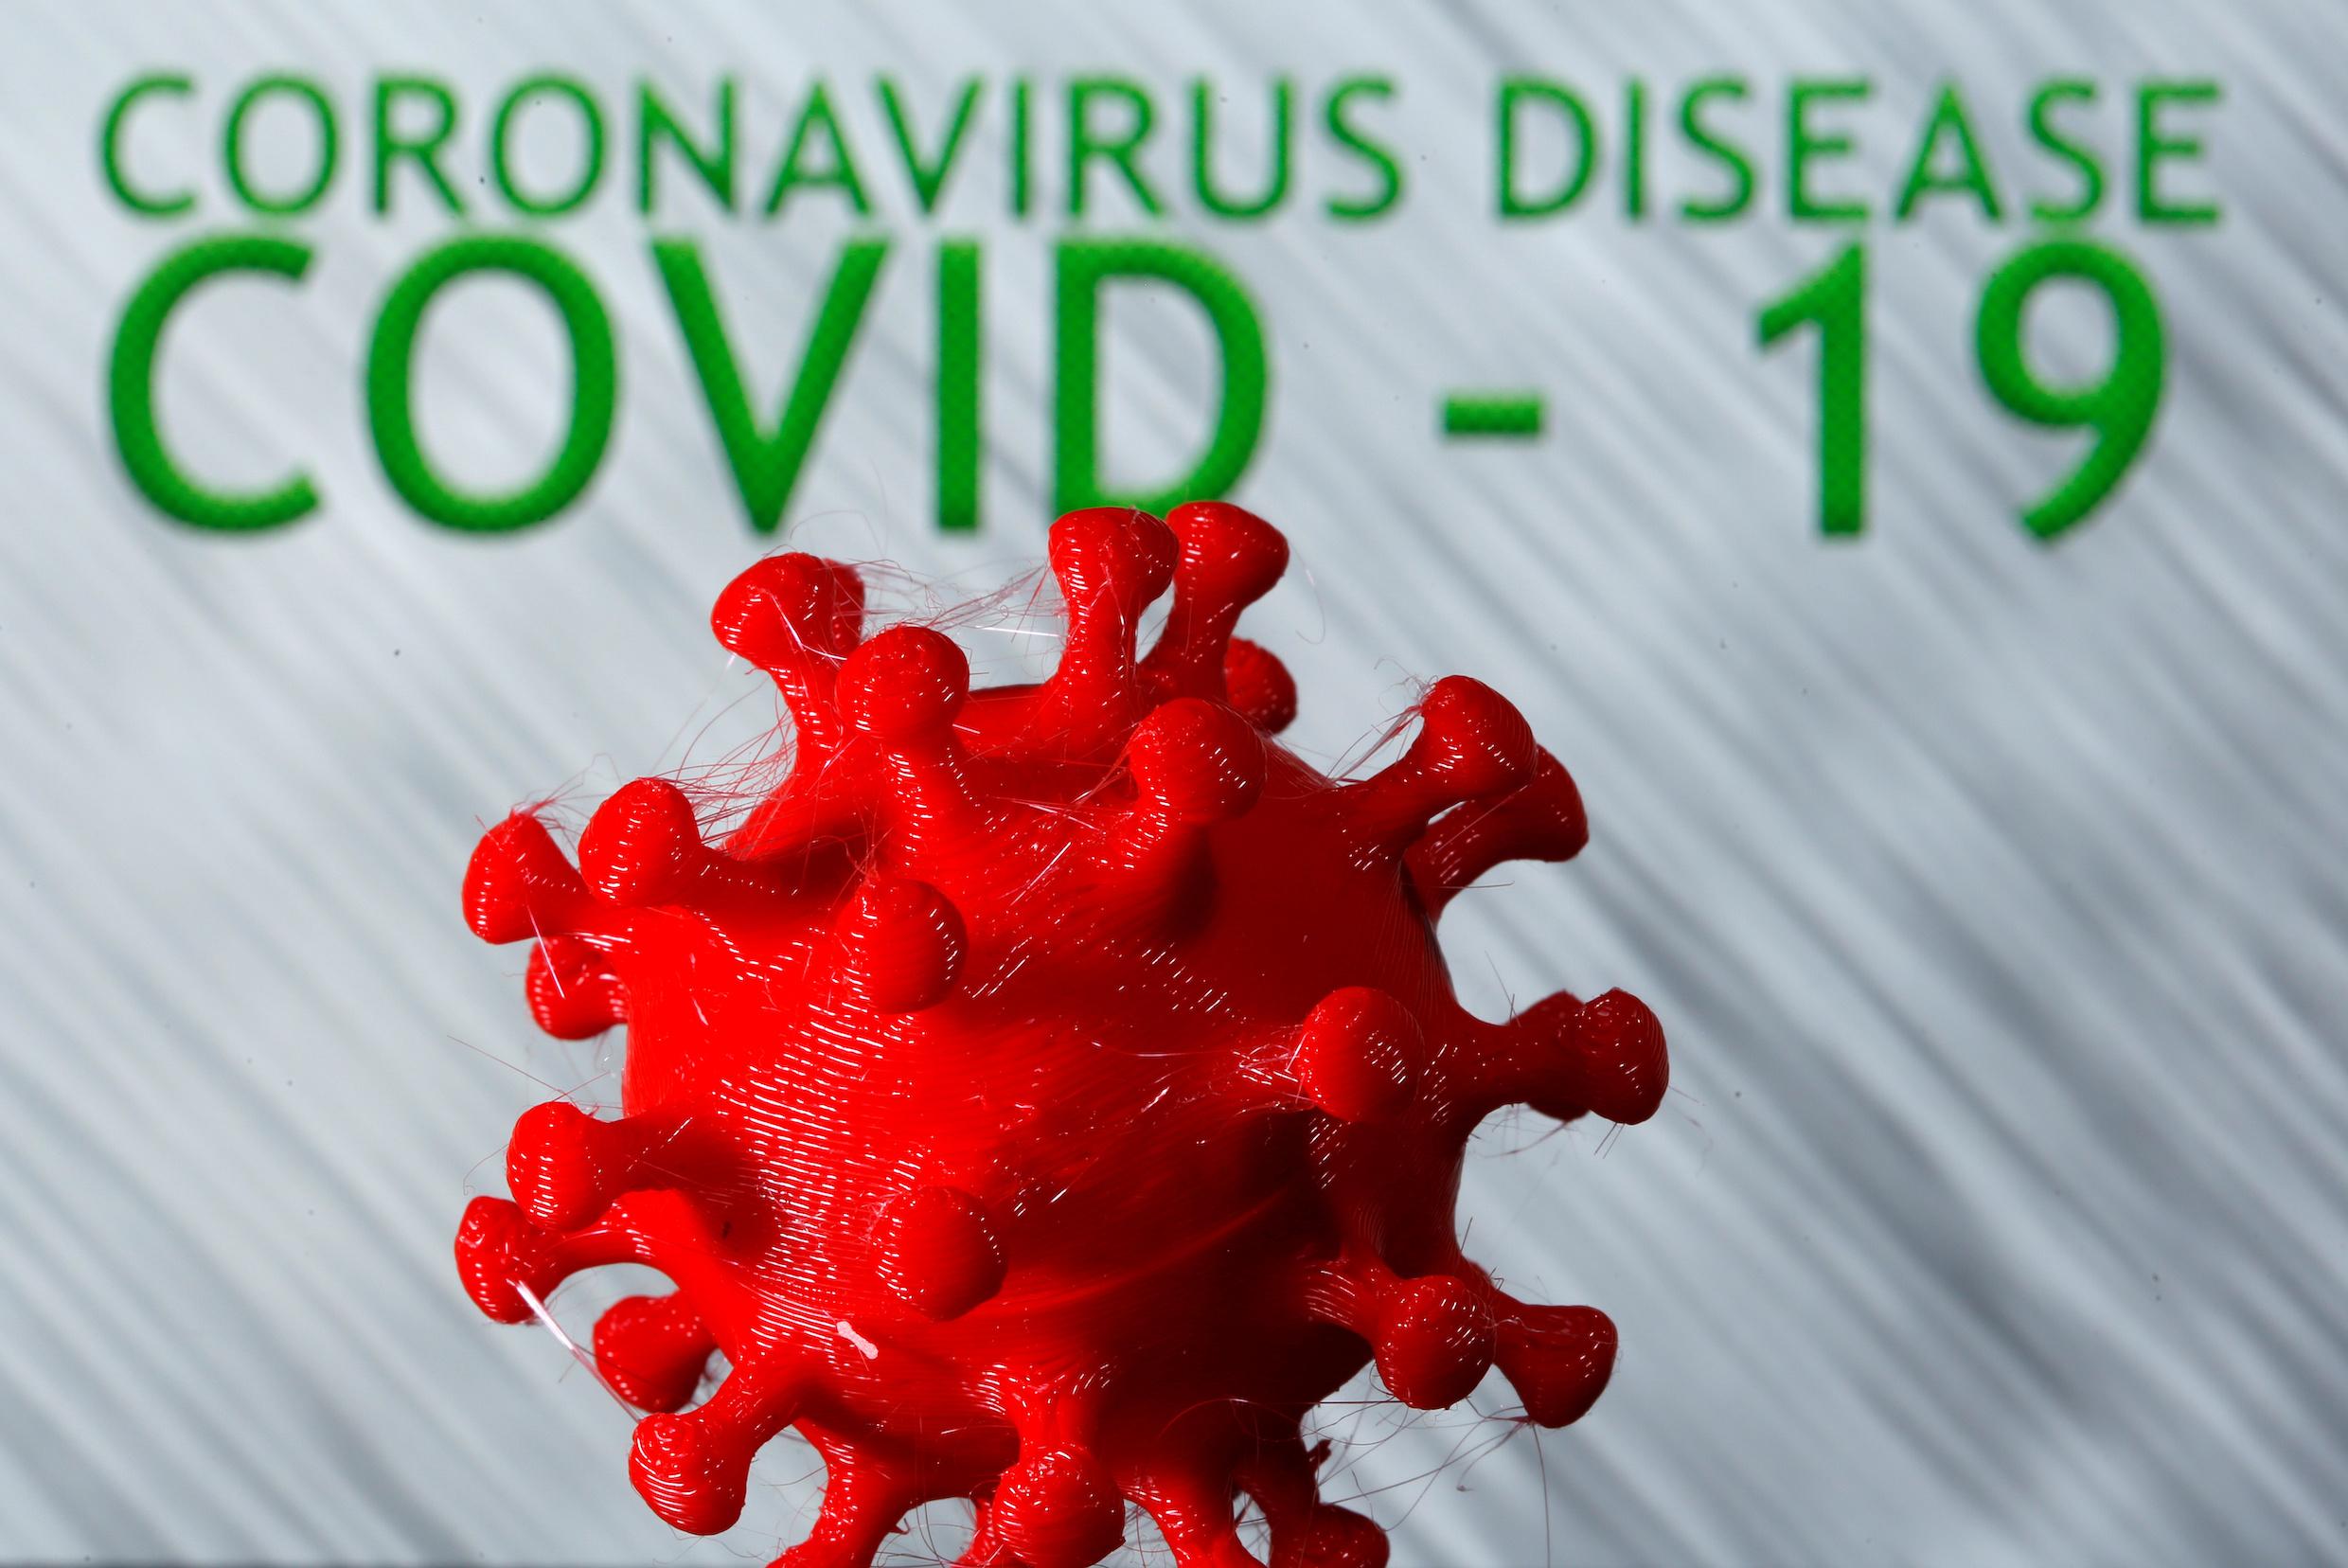 COVID-19 pandemic programs of governments losing support